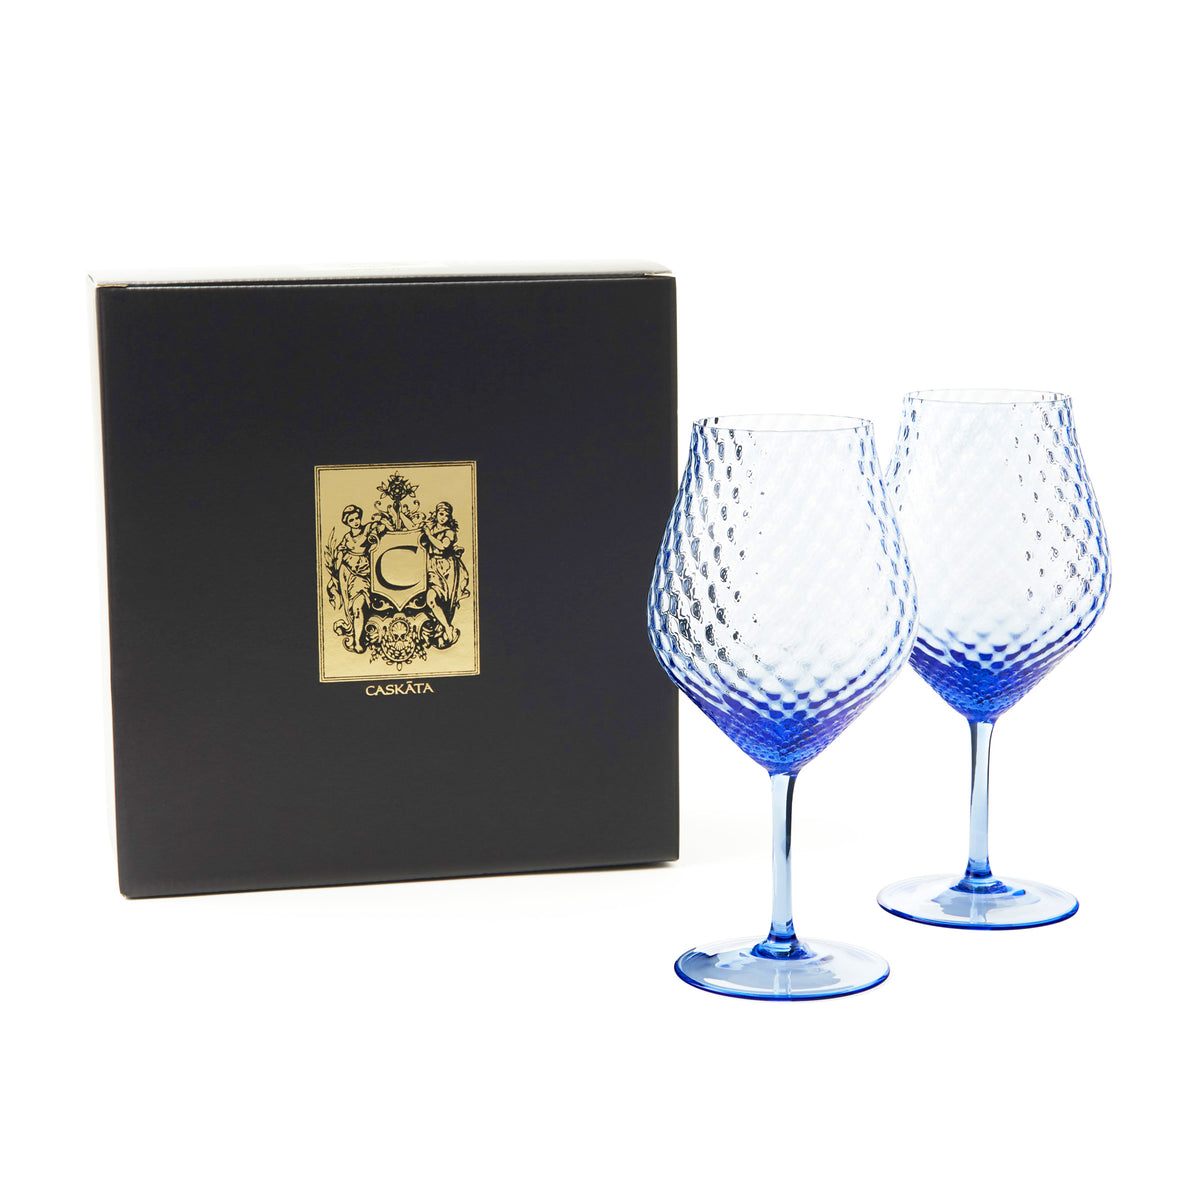 Phoebe cobalt blue mouth-blown optic crystal universal wine glasses from Caskata.